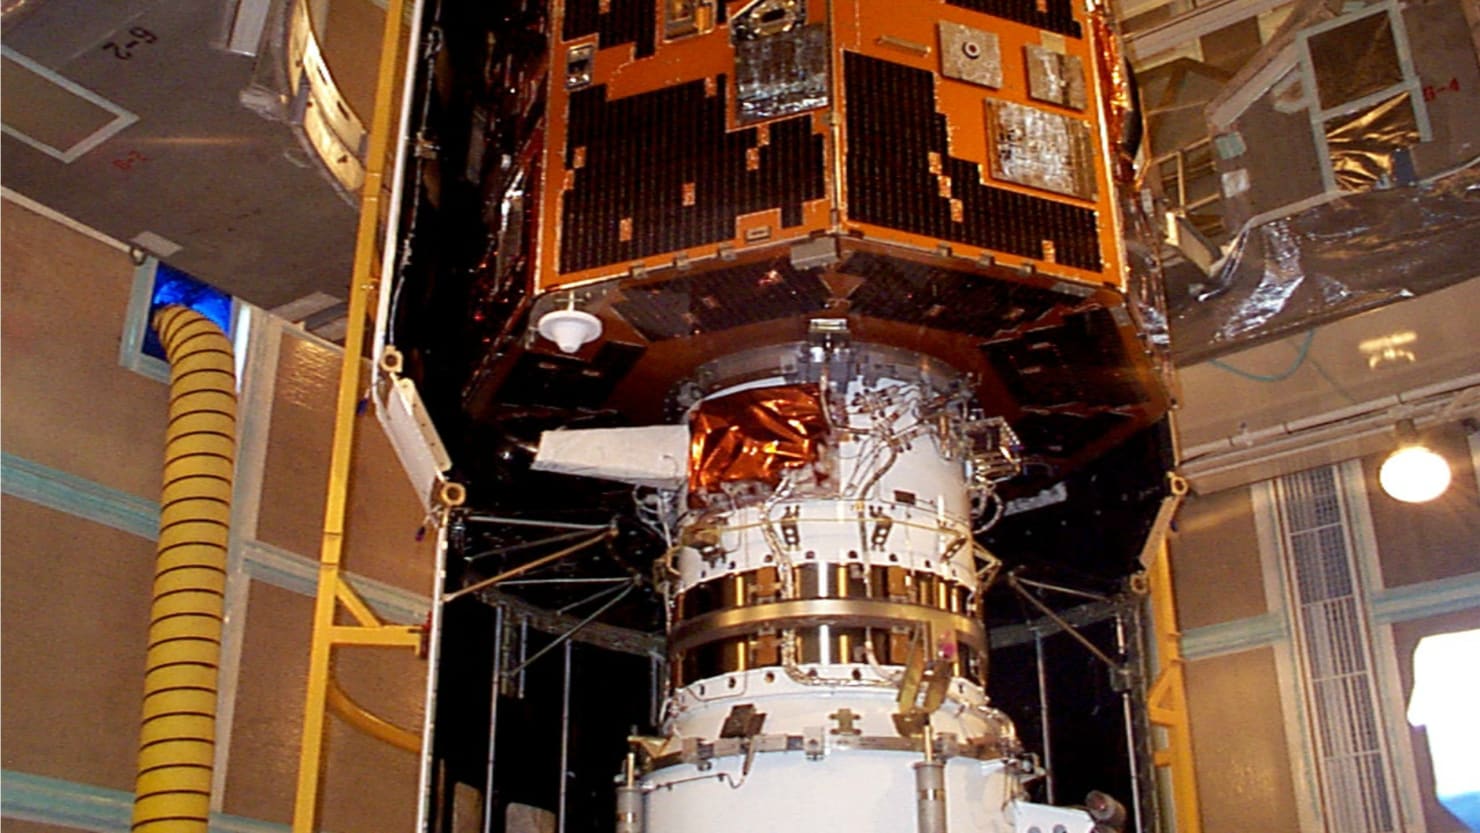 Amateur Astronomer Finds Satellite That NASA Lost